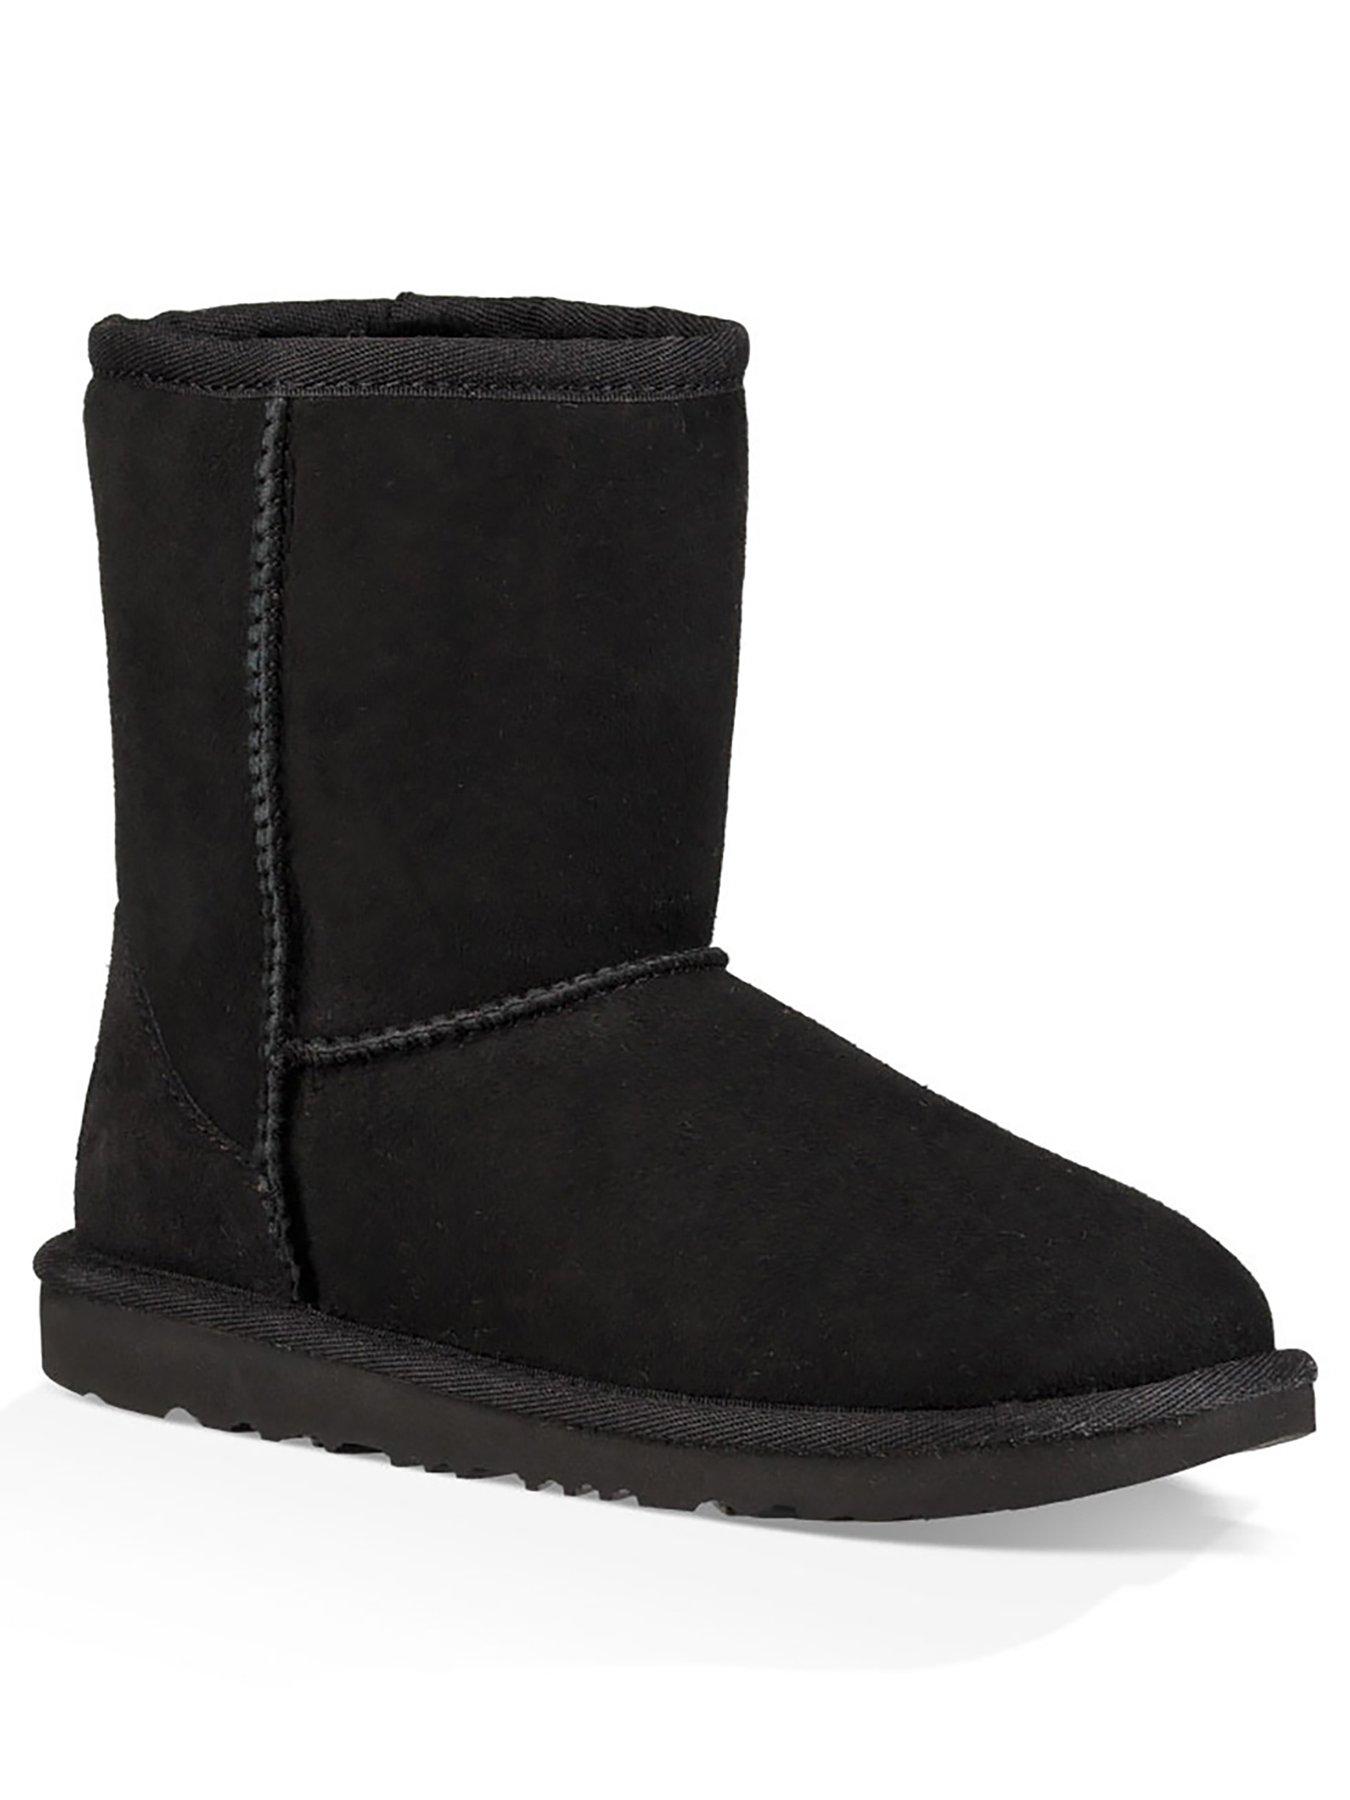 small black ugg boots